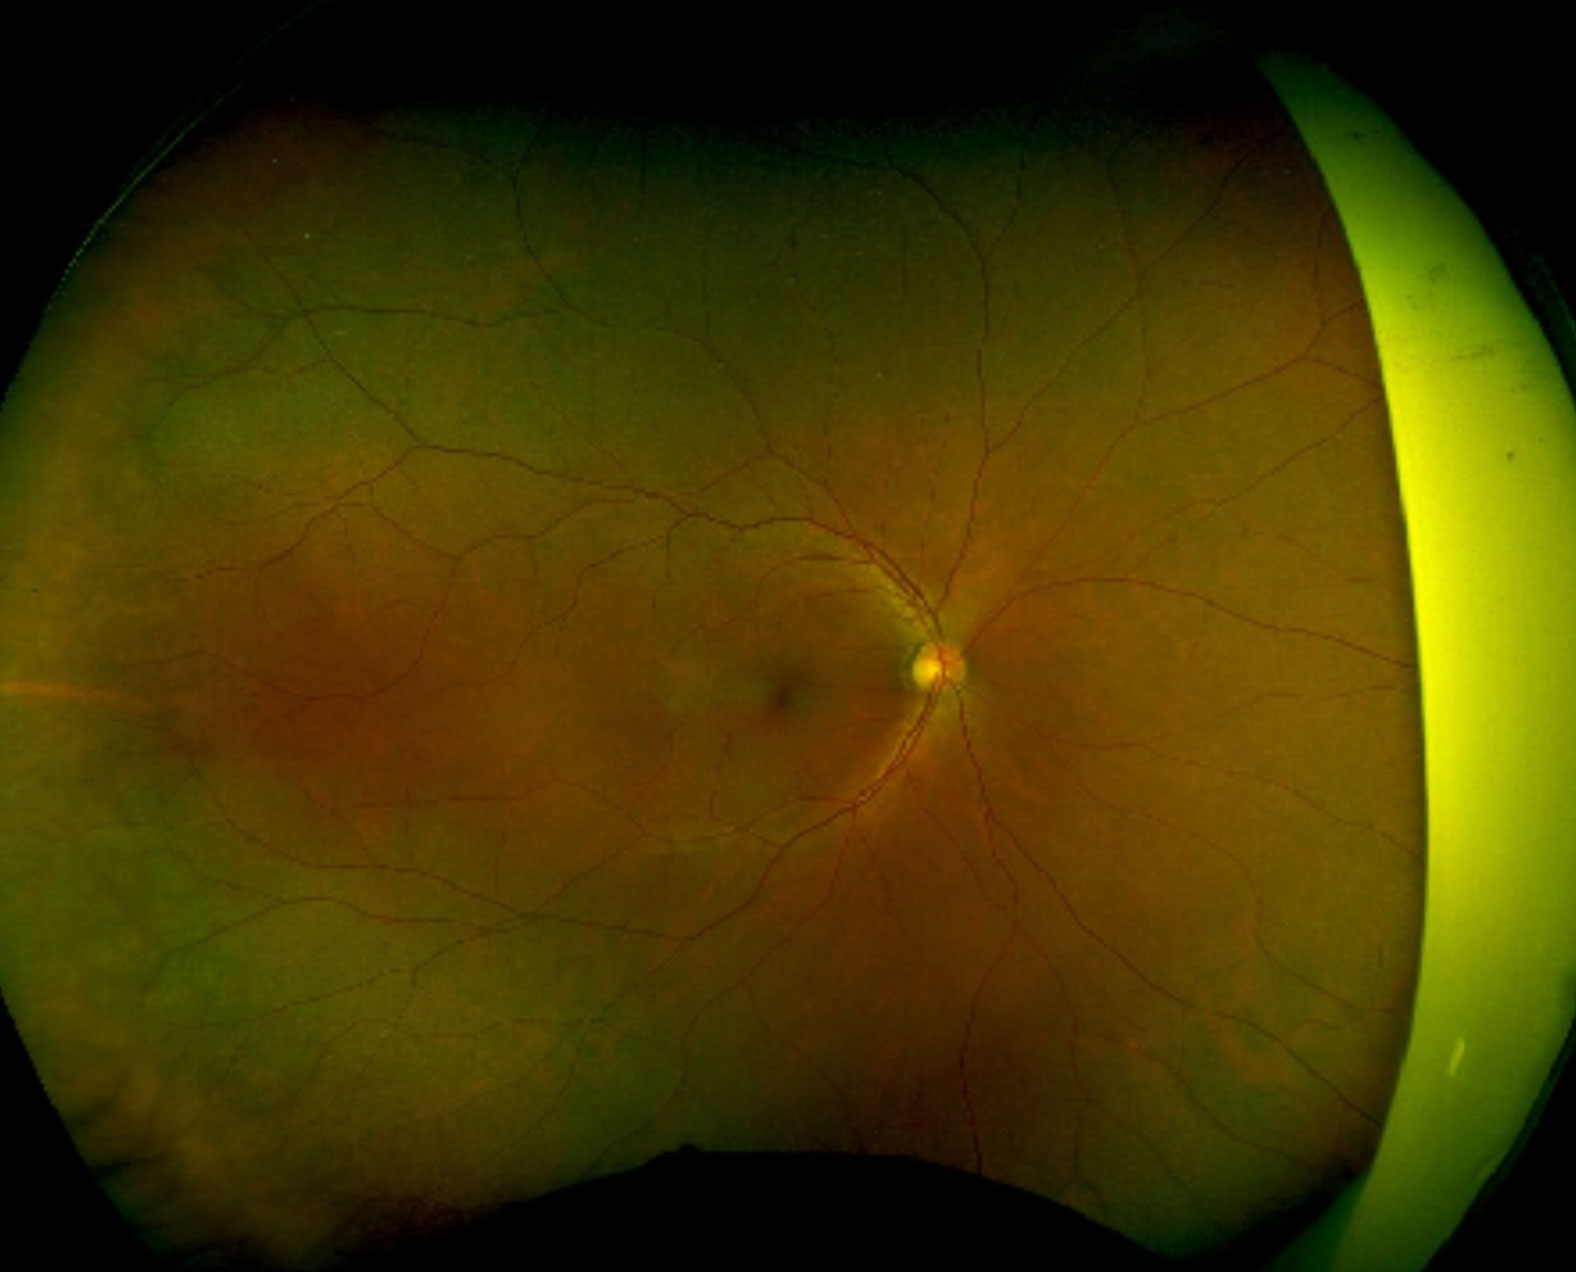 Optical coherence tomography shows multiple bilateral exudative retinal detachments, outer retinal cysts and thickened choroids.